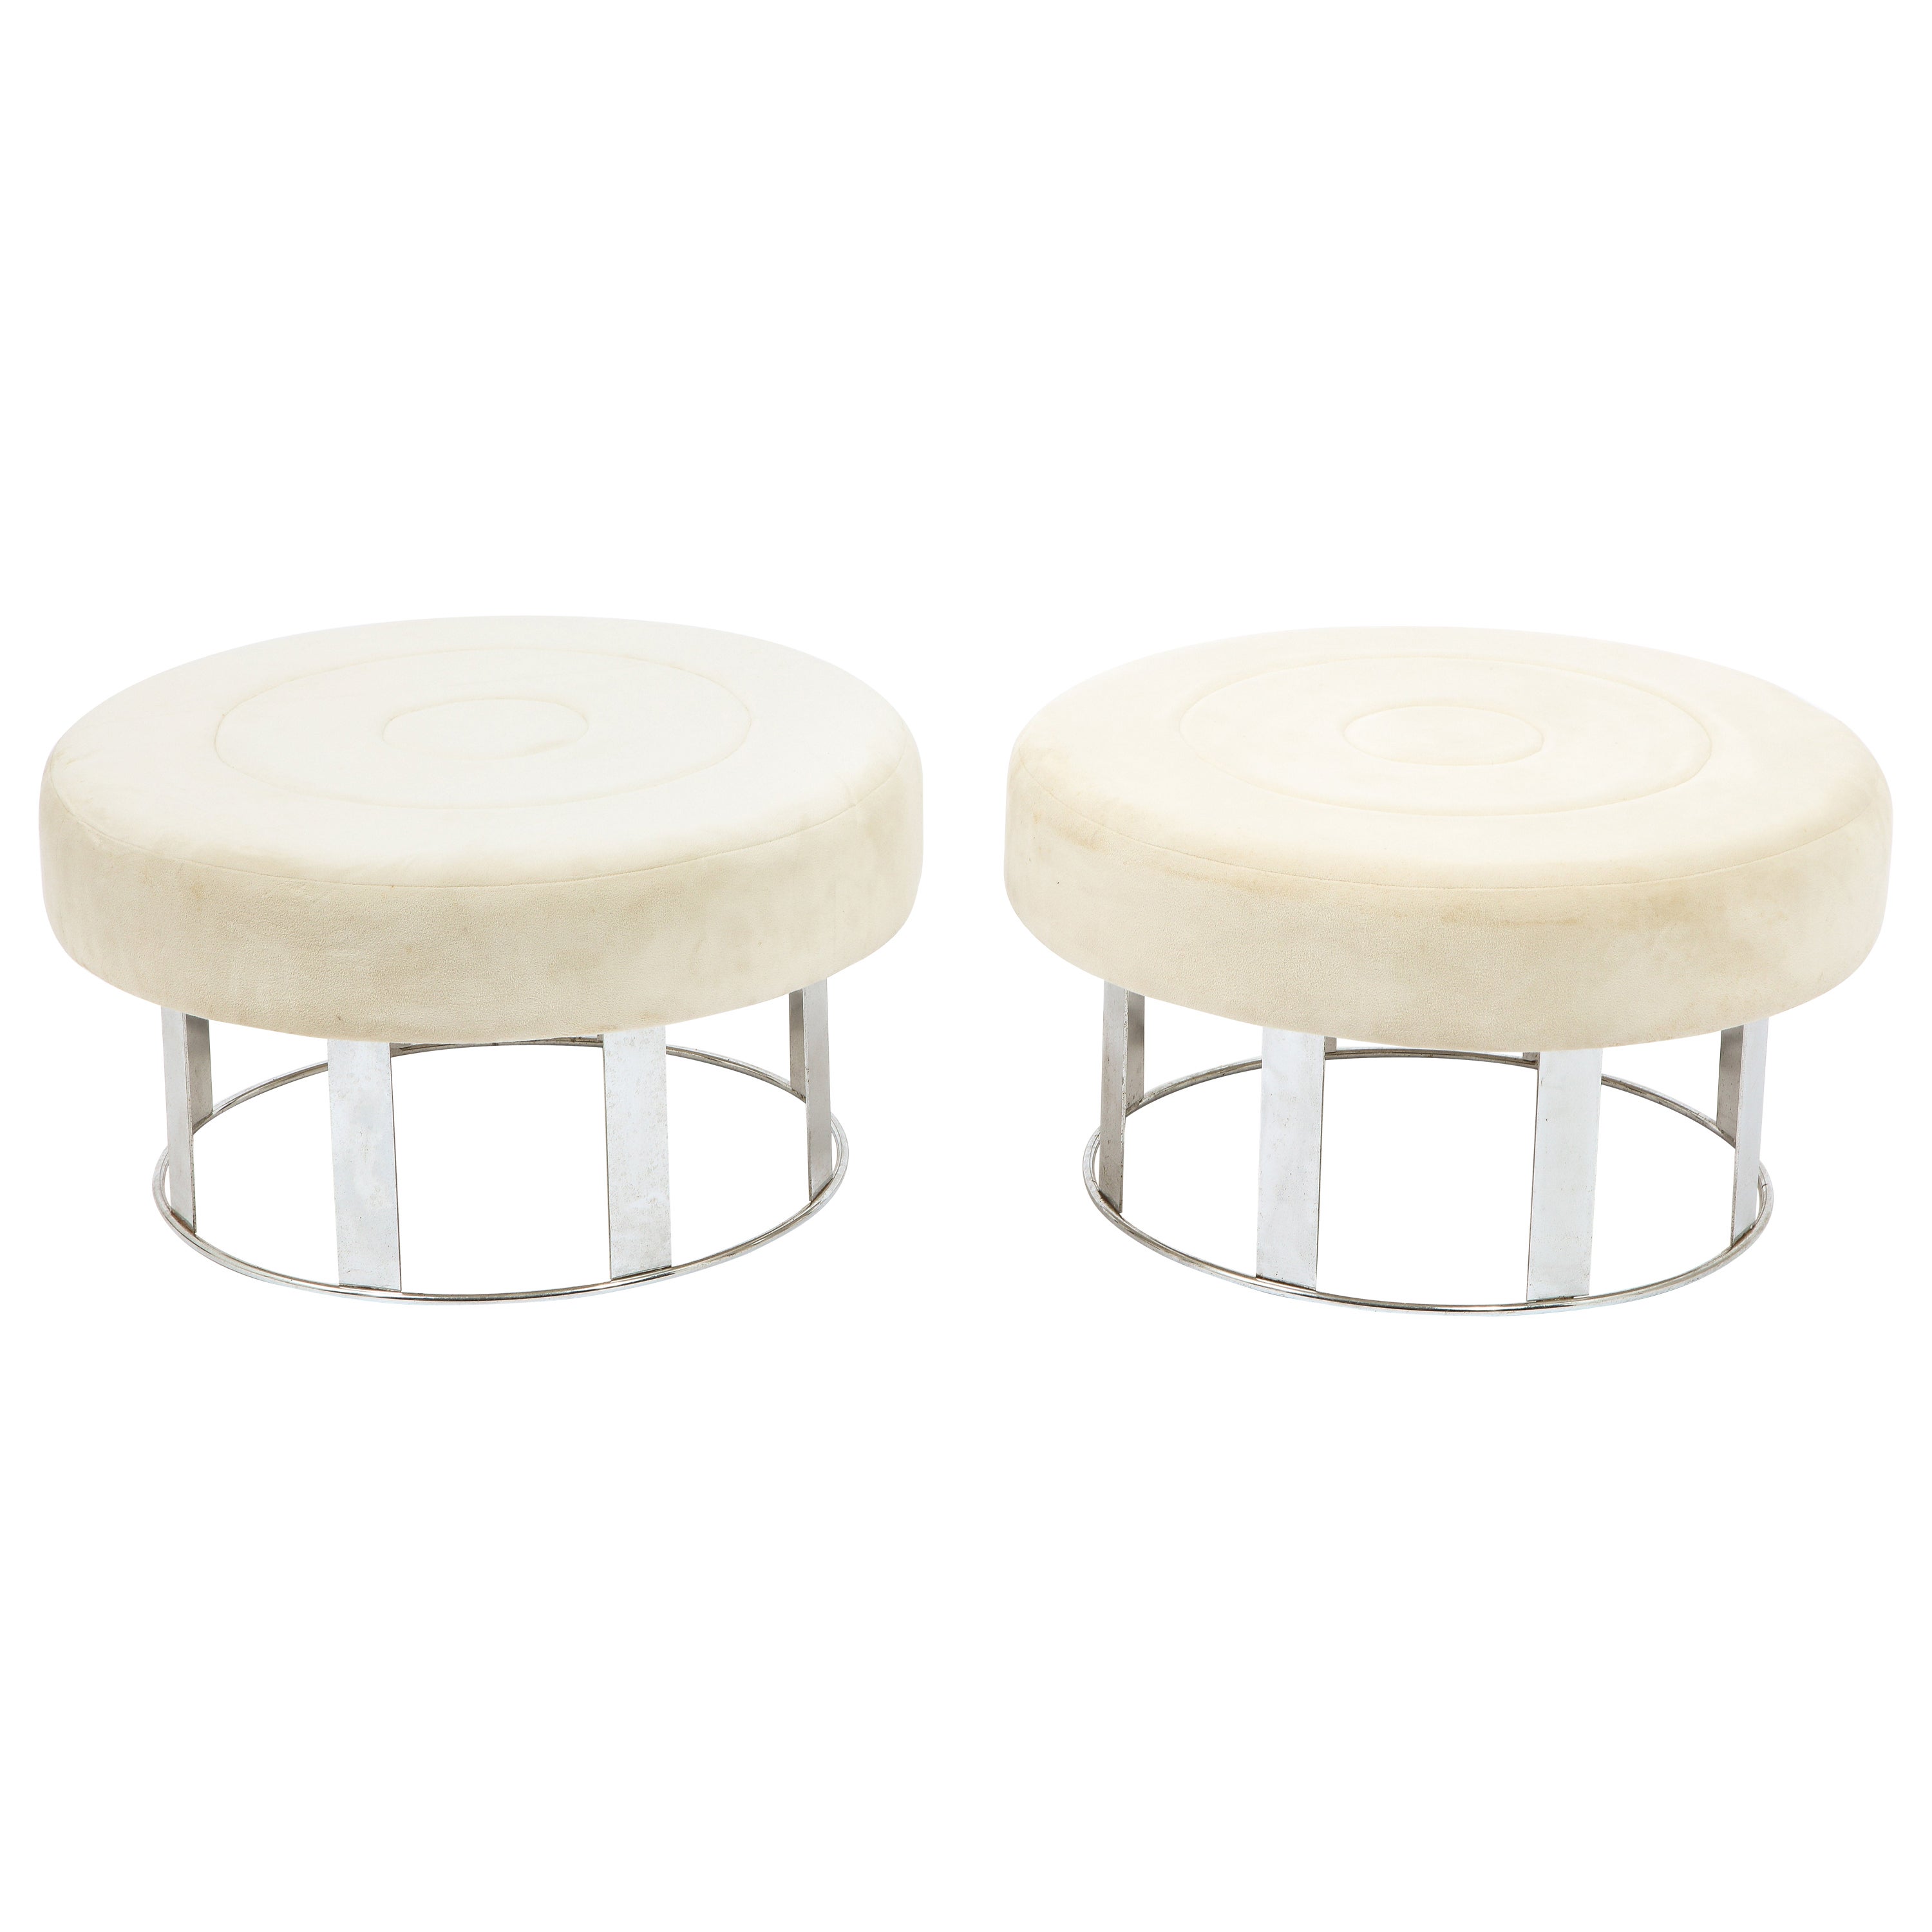 Most likely a custom order, a pair of large and comfortable ottomans in white velvet on windowed chrome bases.